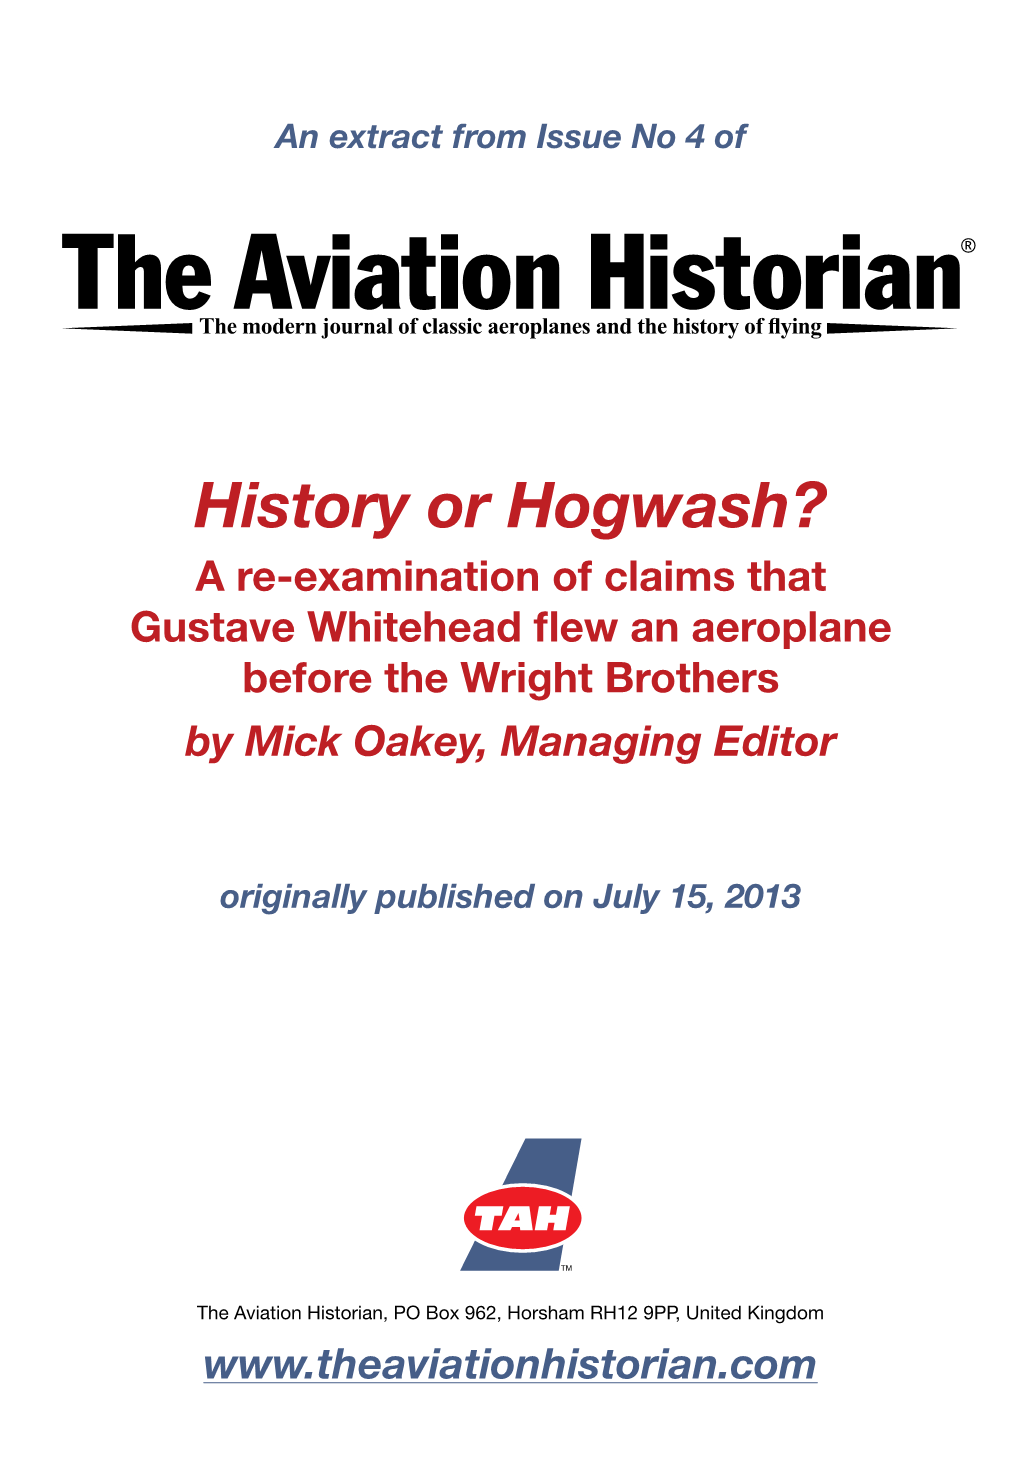 The Aviation Historian® the Modern Journal of Classic Aeroplanes and the History of Flying